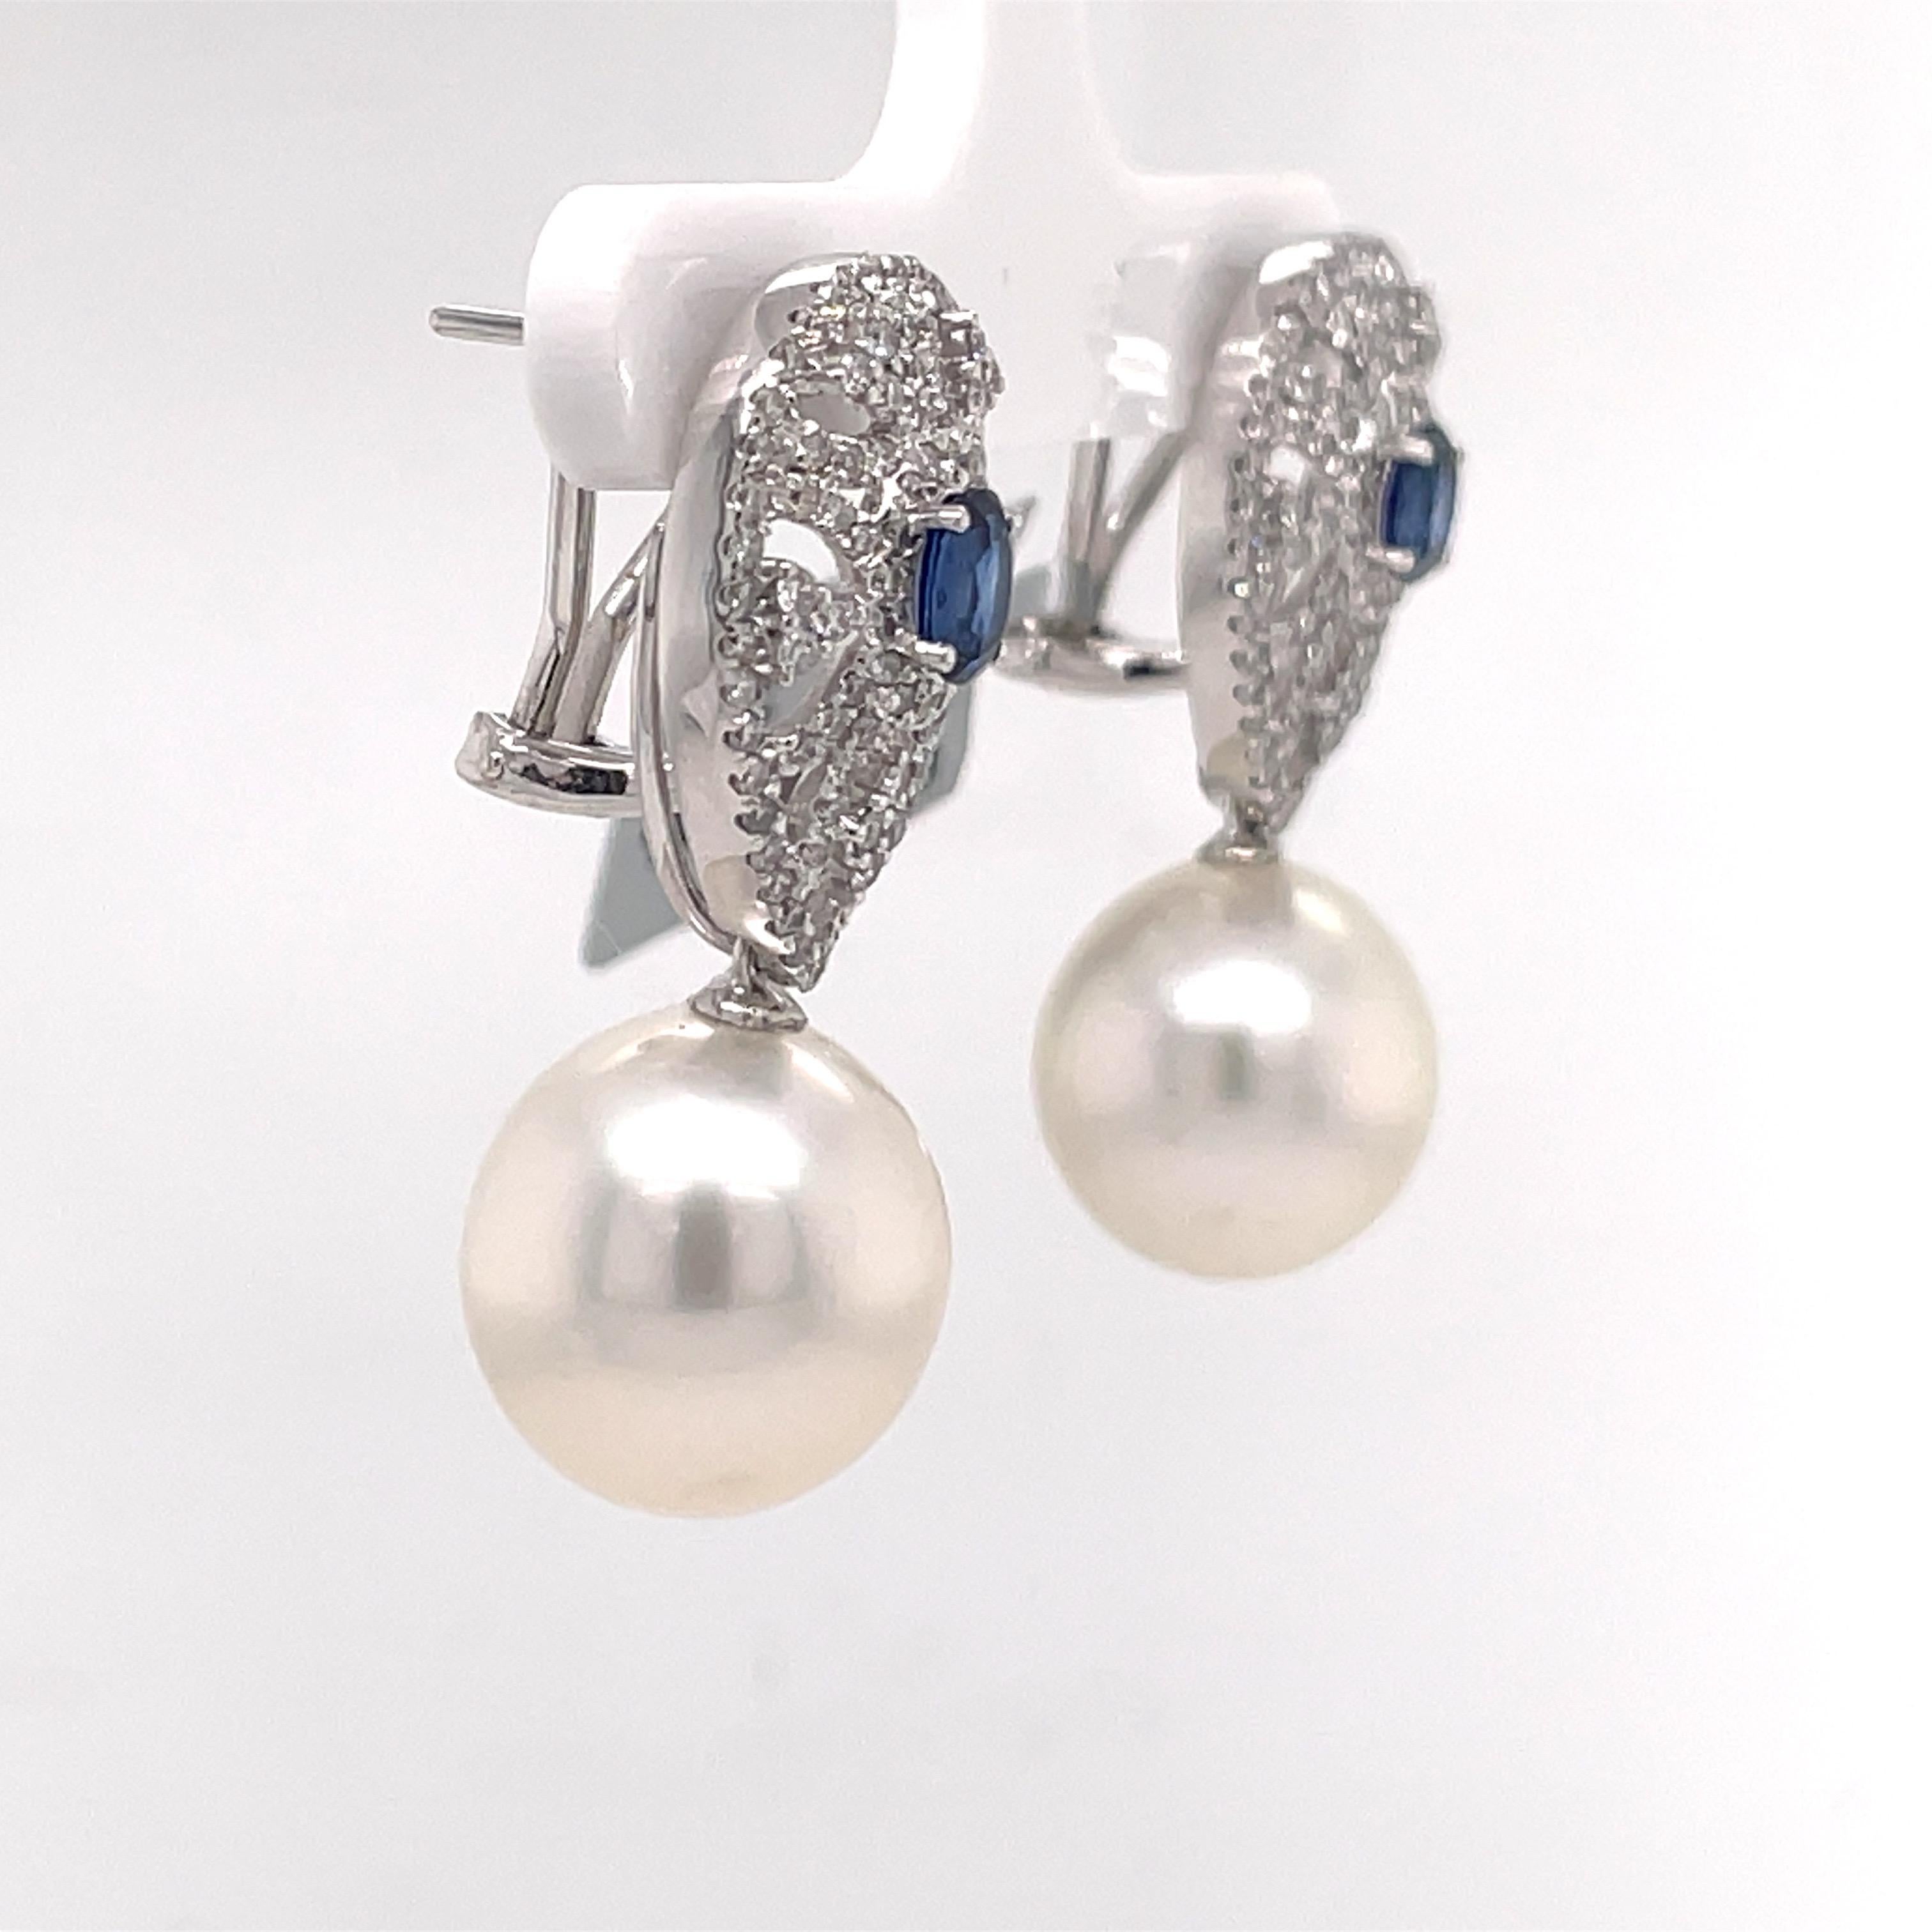 Sapphire Diamond South Sea Pearl Drop Earrings 2.16 Carats 18 Carat White Gold In New Condition For Sale In New York, NY